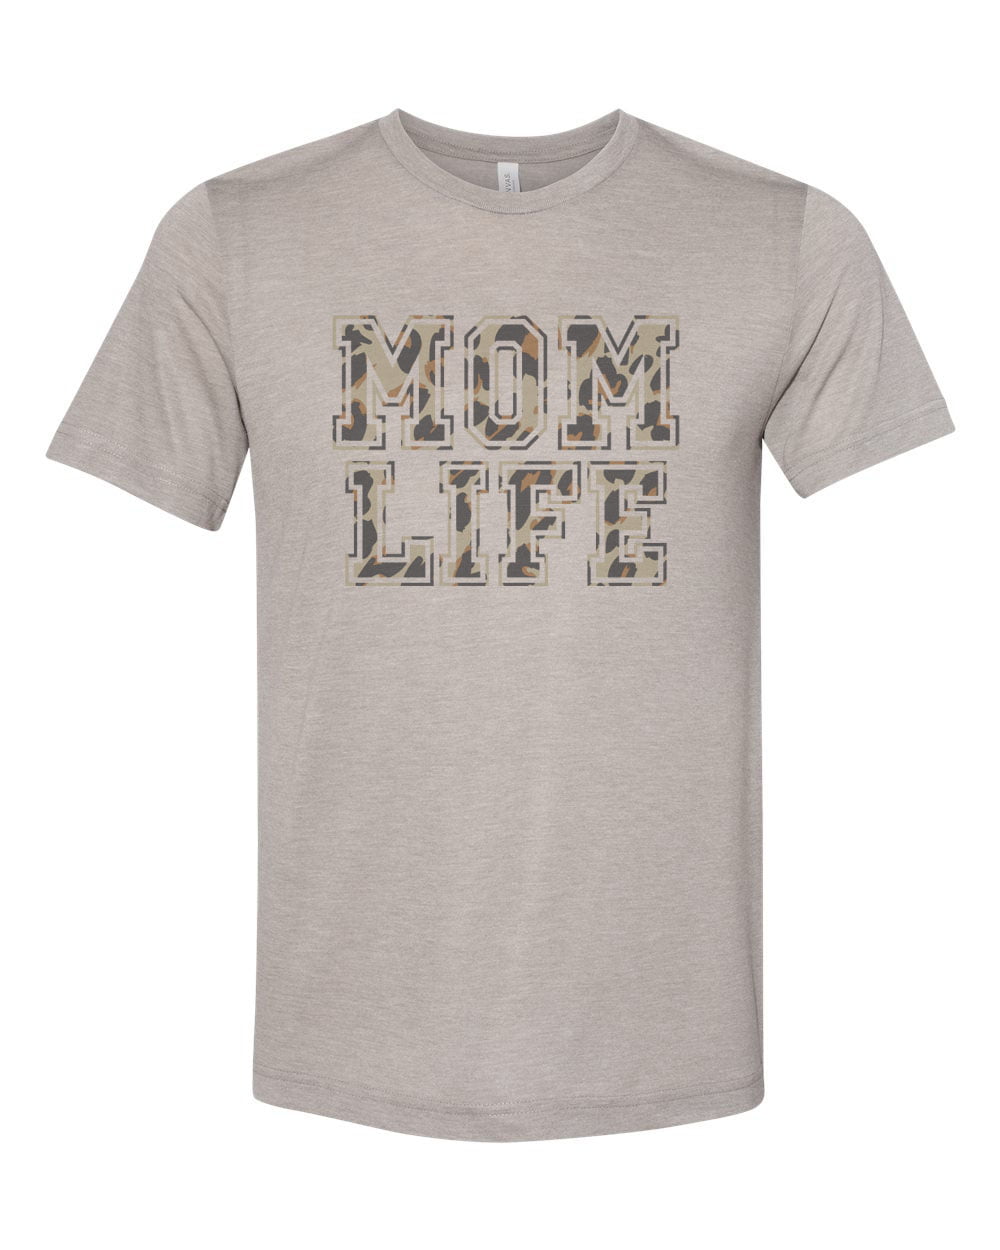 Gift For Mom Mom Life Tee Mom Shirt Wife Shirt Gift For Mother Wife Mom Boss Shirt Leopard Print Mama Shirt Bella Canvas Shirt